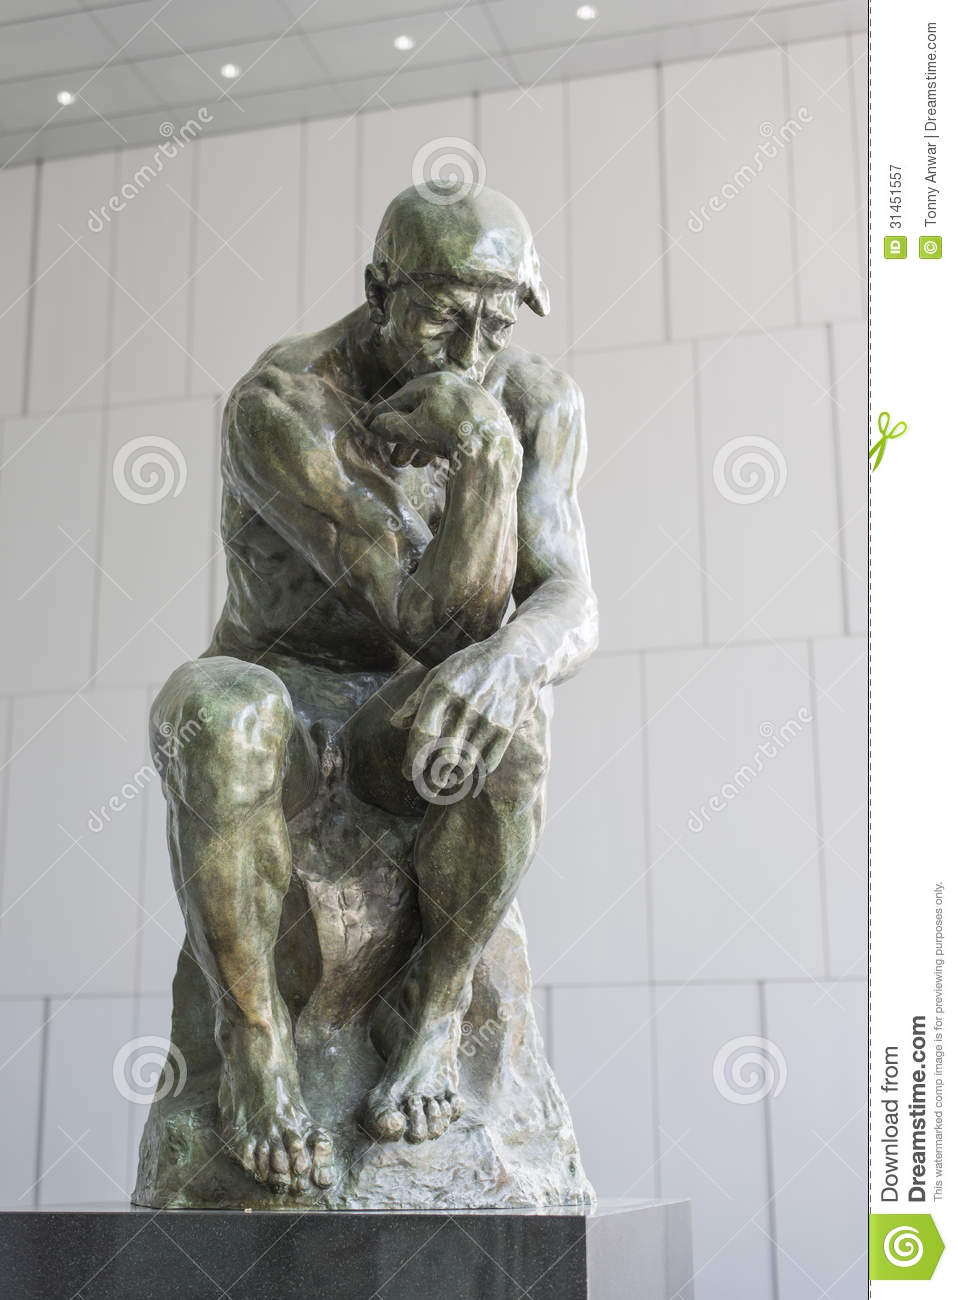 The Thinker Statue Clipart The Thinker Statue By Rodin